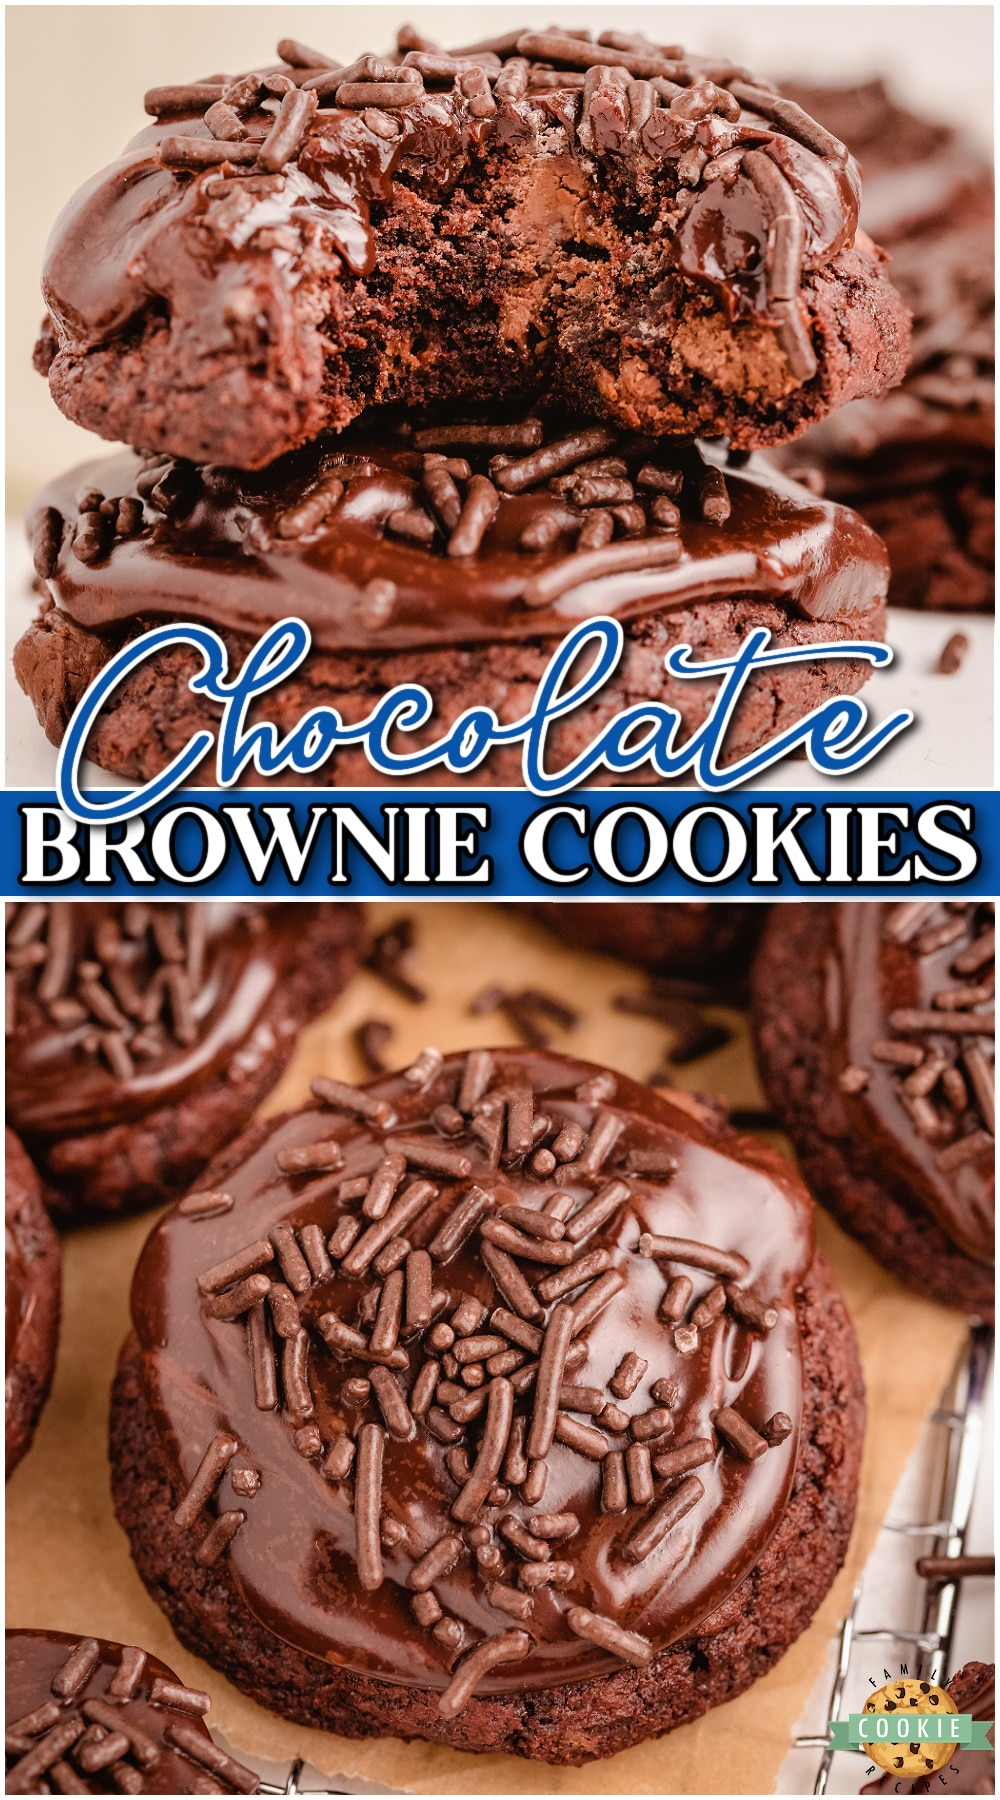 Chewy chocolatey Frosted Brownie Cookies are everything you love about brownies, in cookie form! Soft & chewy with a decadent chocolate icing, these cookies are perfect for chocolate lovers!